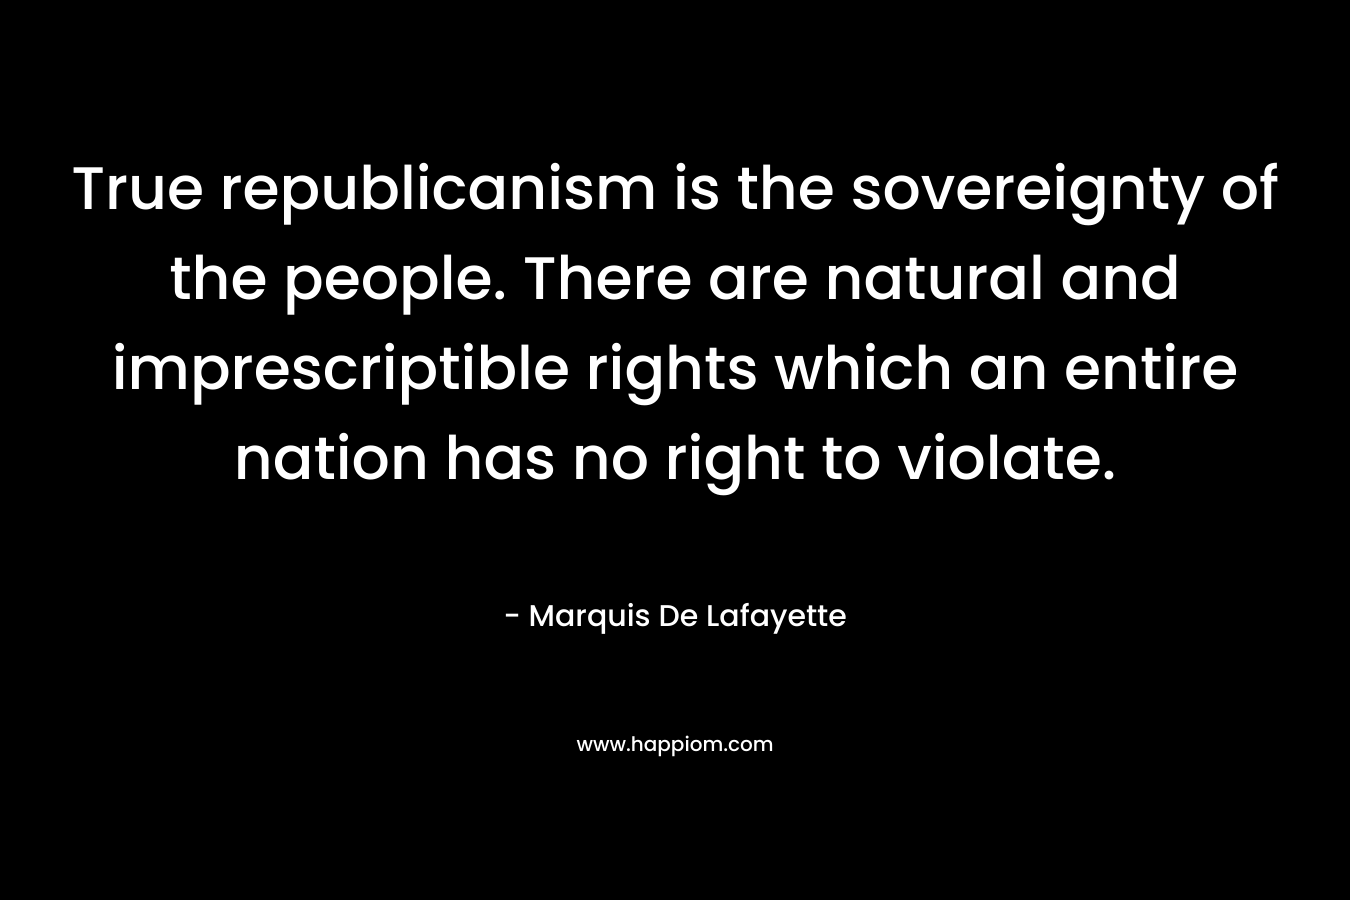 True republicanism is the sovereignty of the people. There are natural and imprescriptible rights which an entire nation has no right to violate.